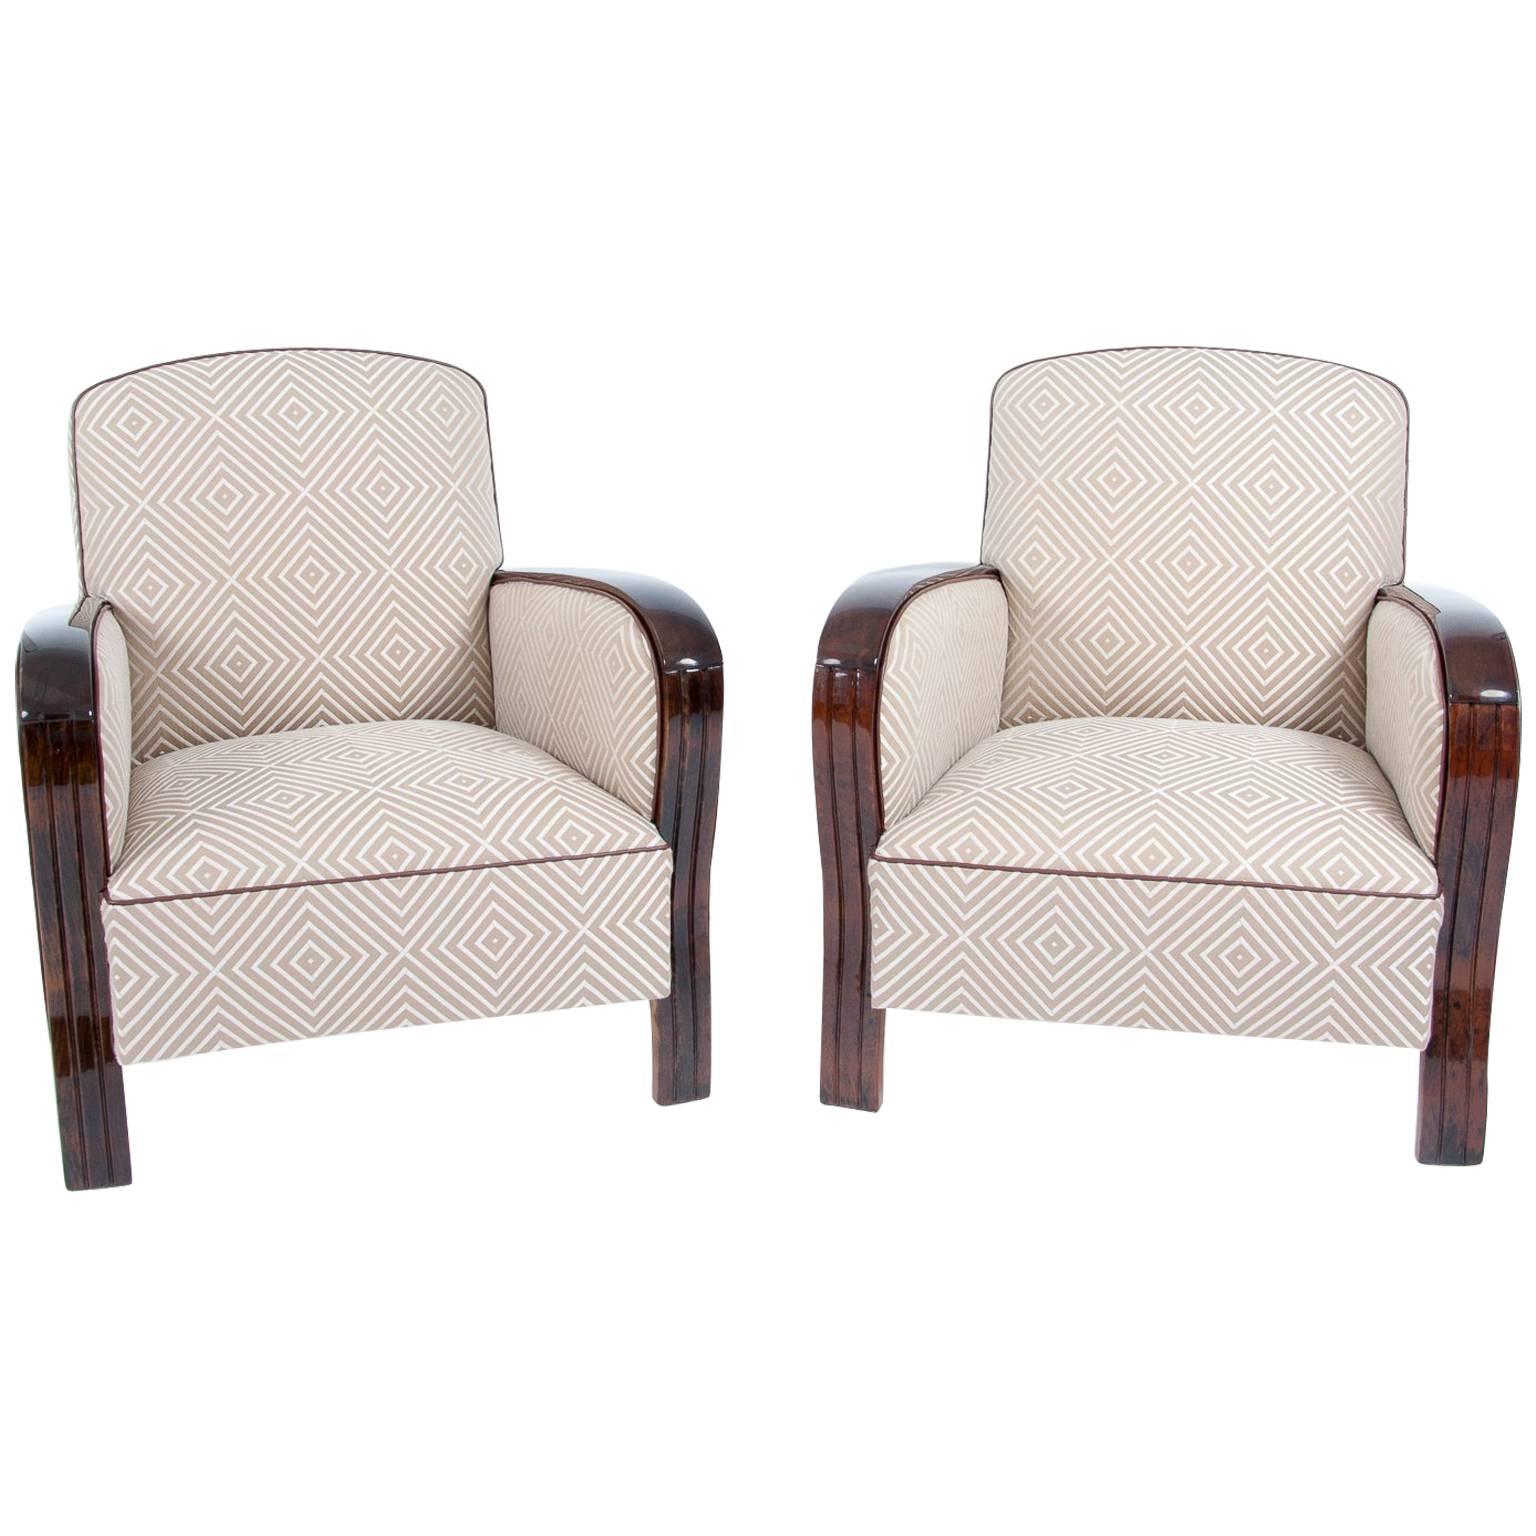 Pair of French Art Deco Club Chairs, France, around 1940